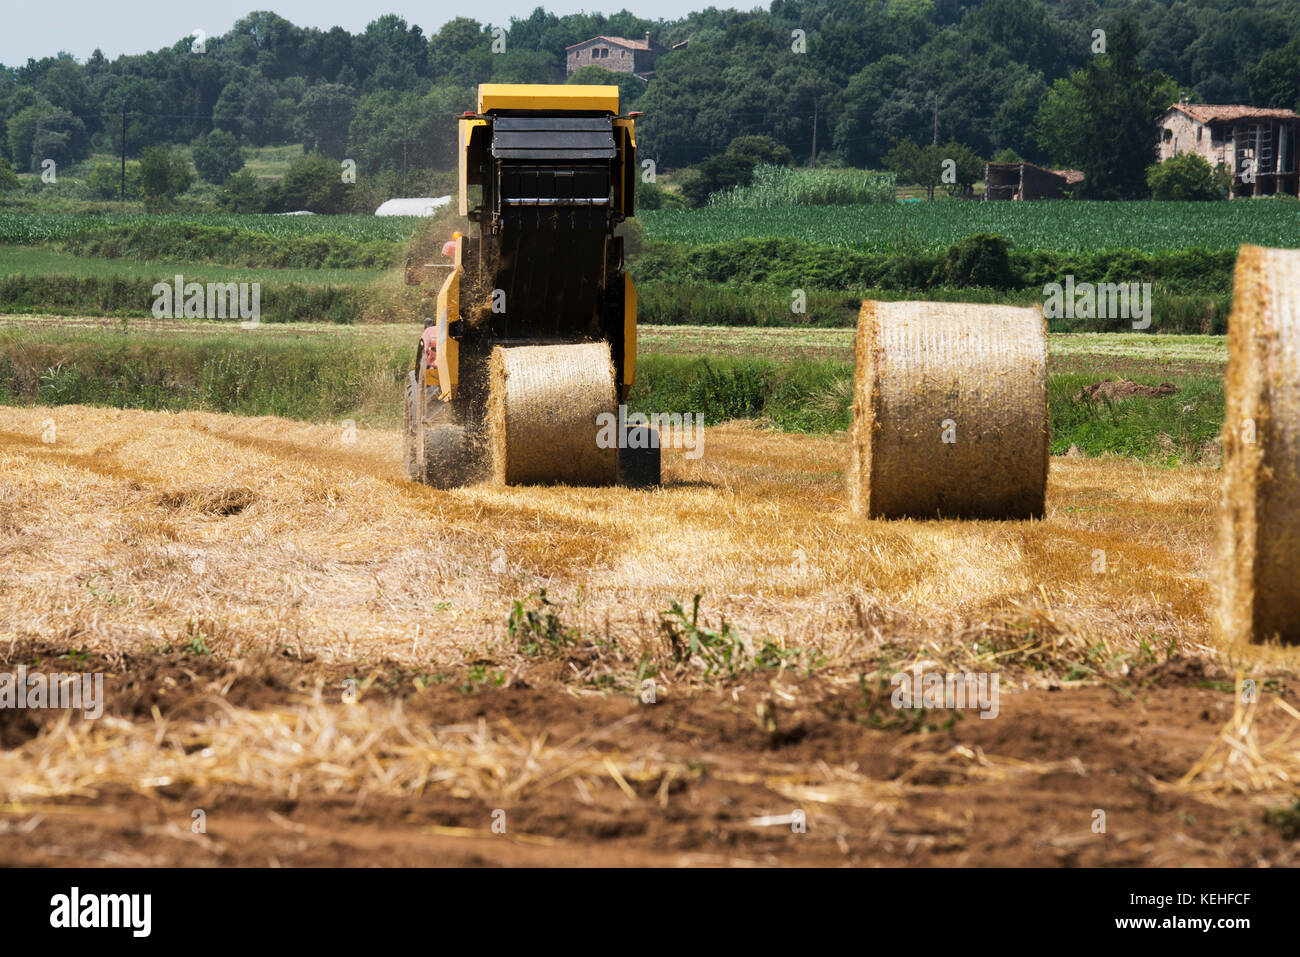 Tractor baling hay in field Stock Photo